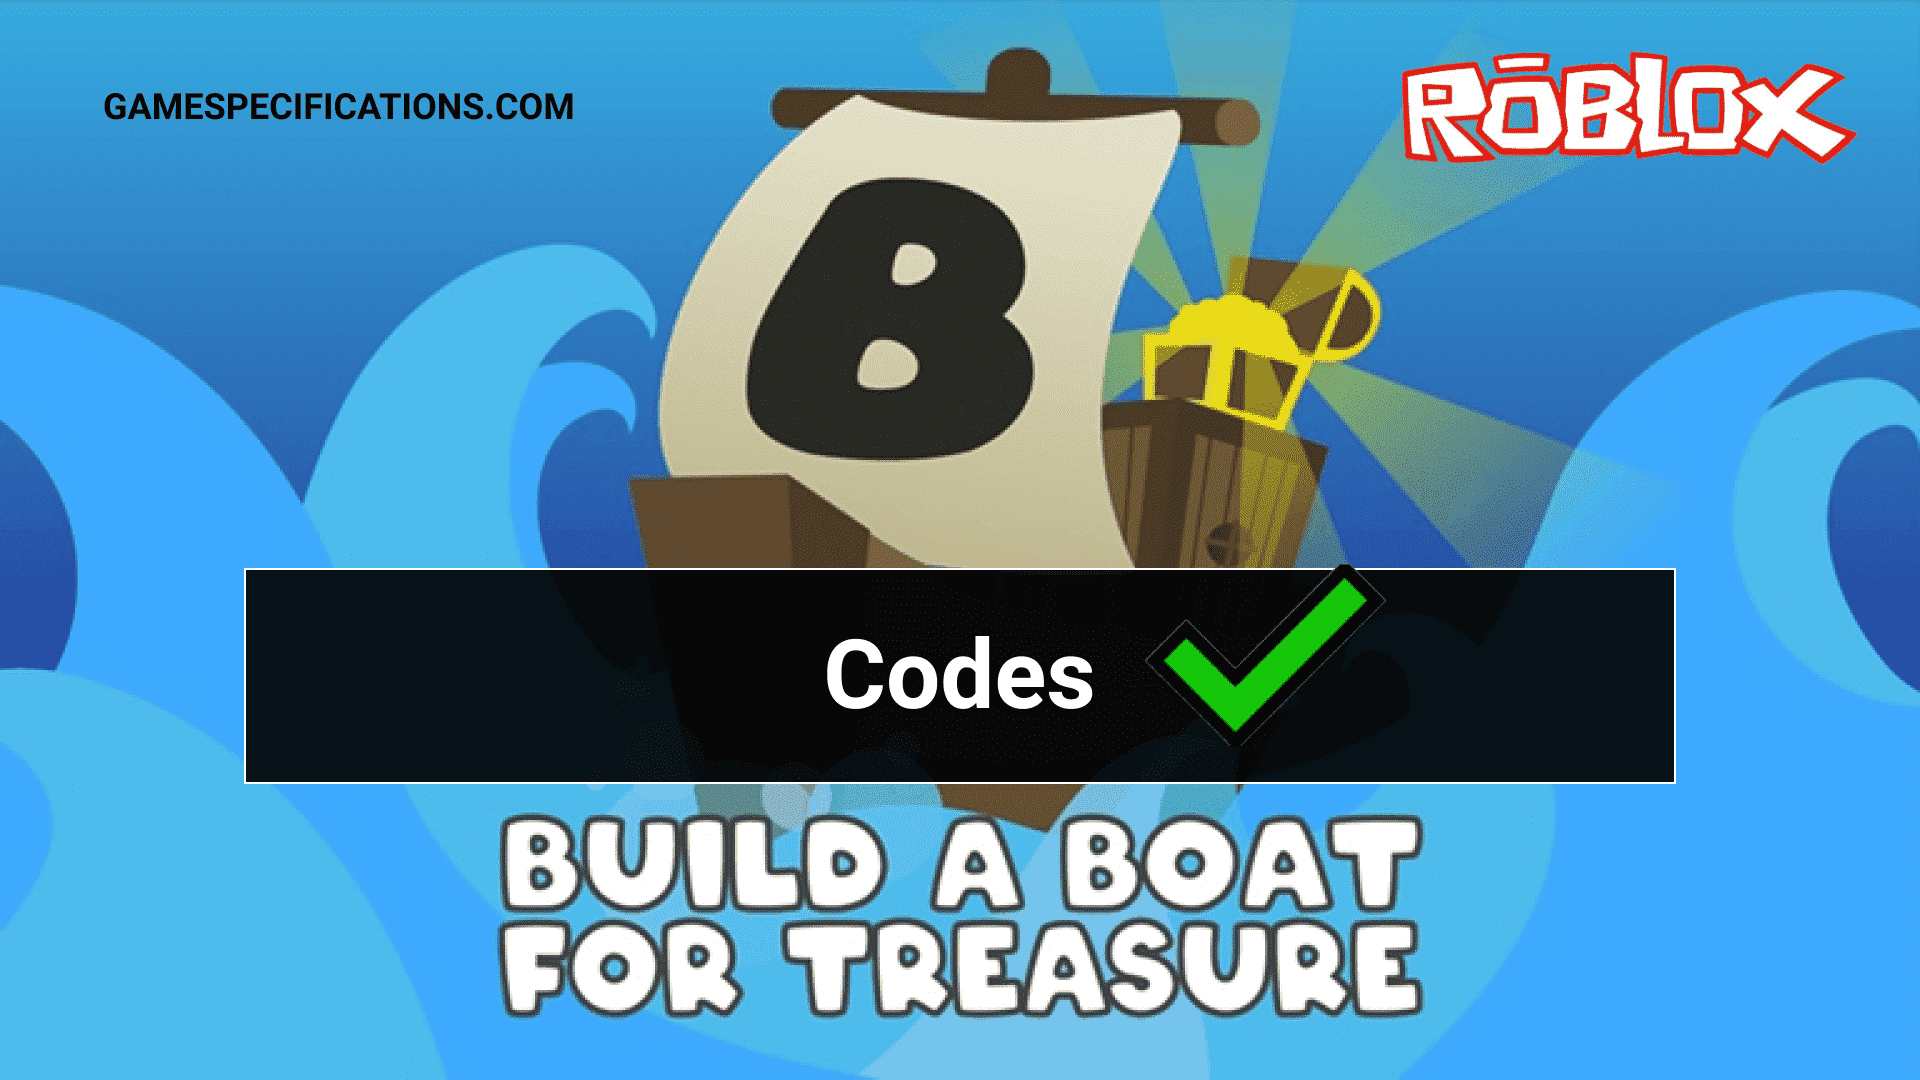 Build a boat codes wiki